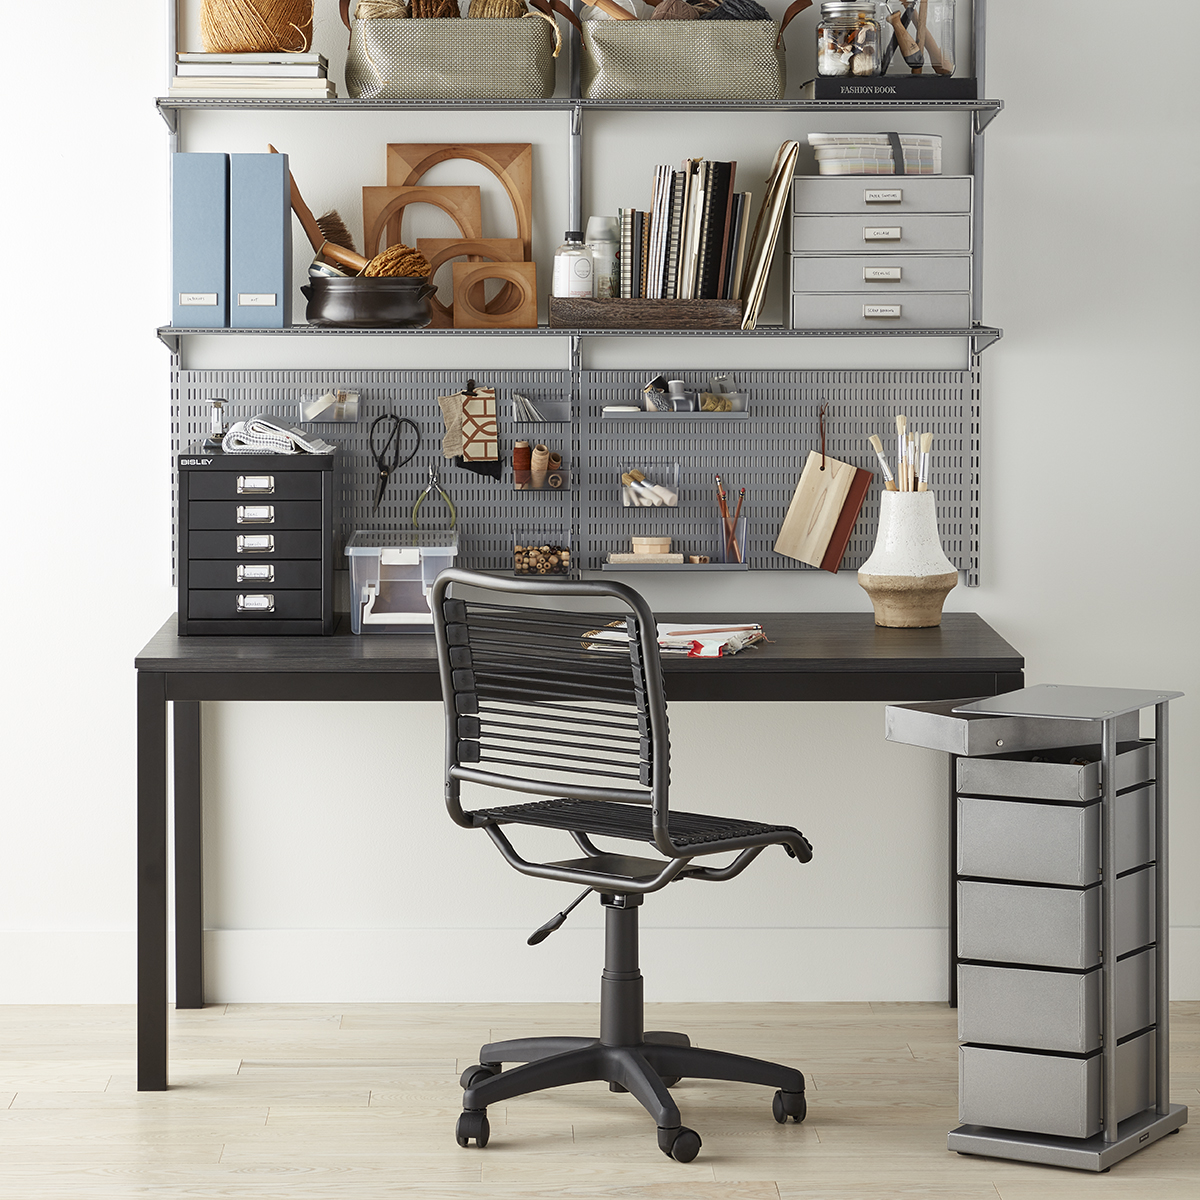 Platinum Elfa Home Office Shelving | The Container Store